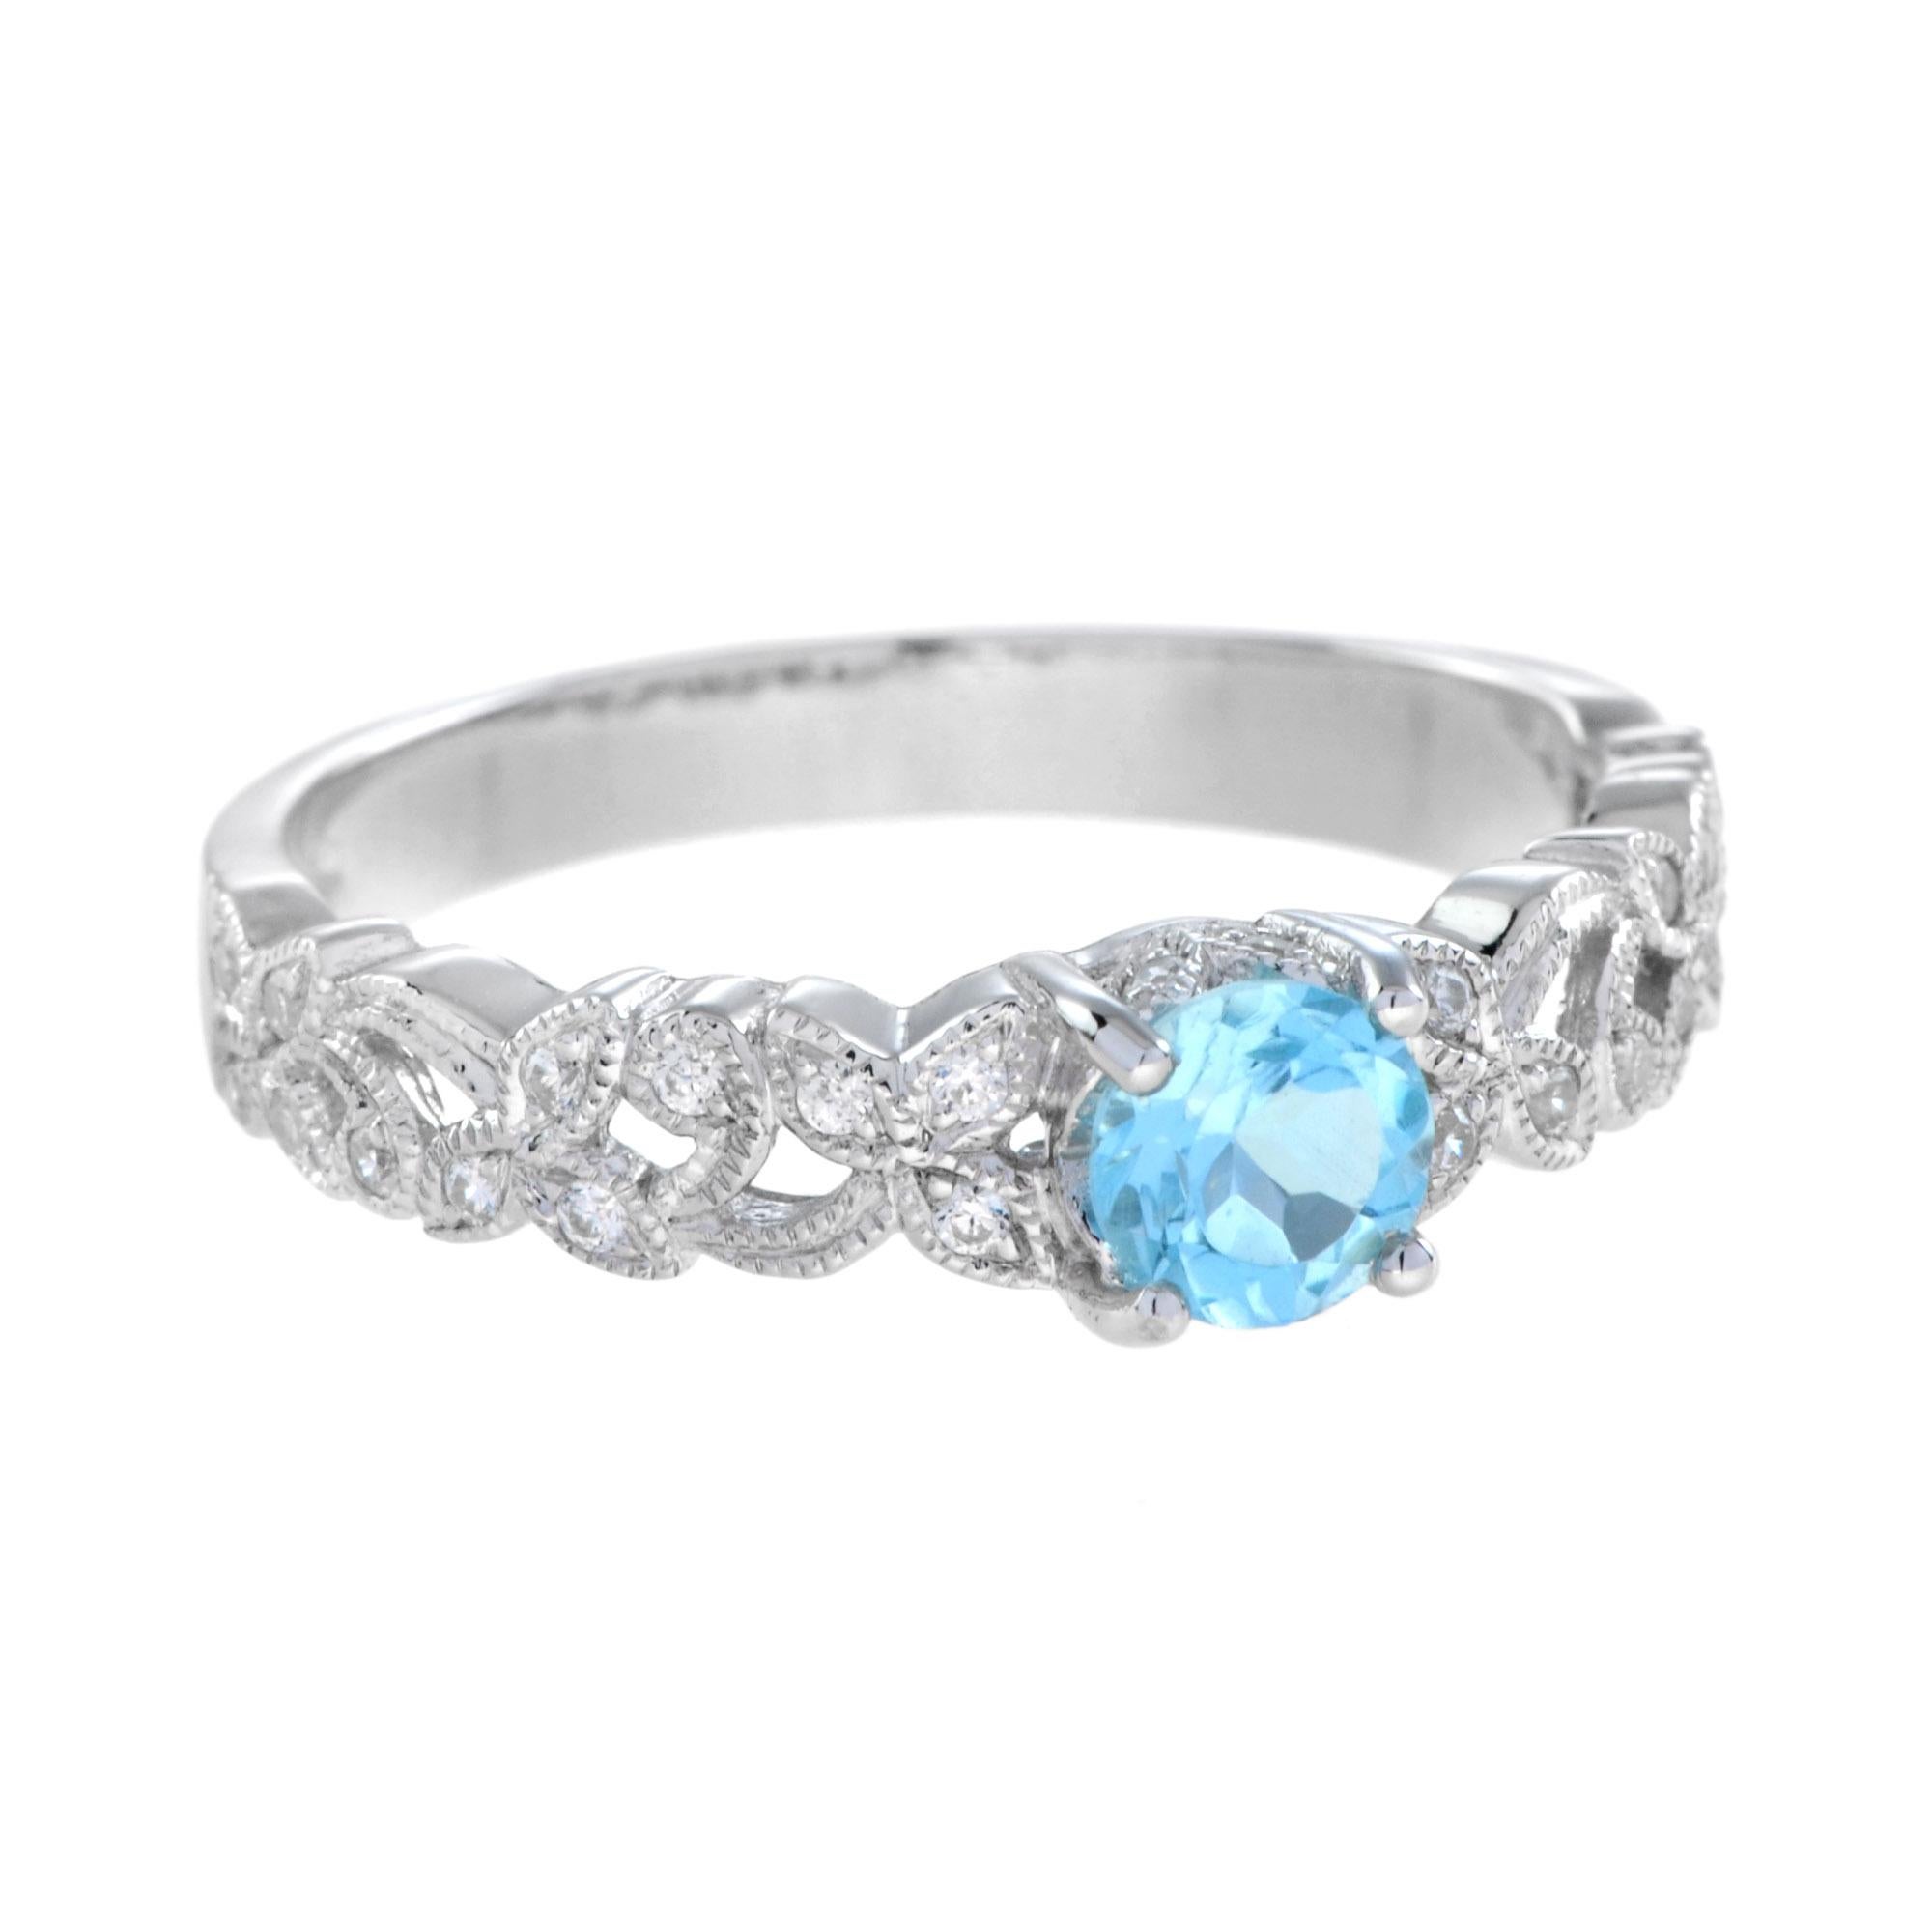 For Sale:  One Round Blue Topaz with Diamond Filigree Band Ring in 14K White Gold 2